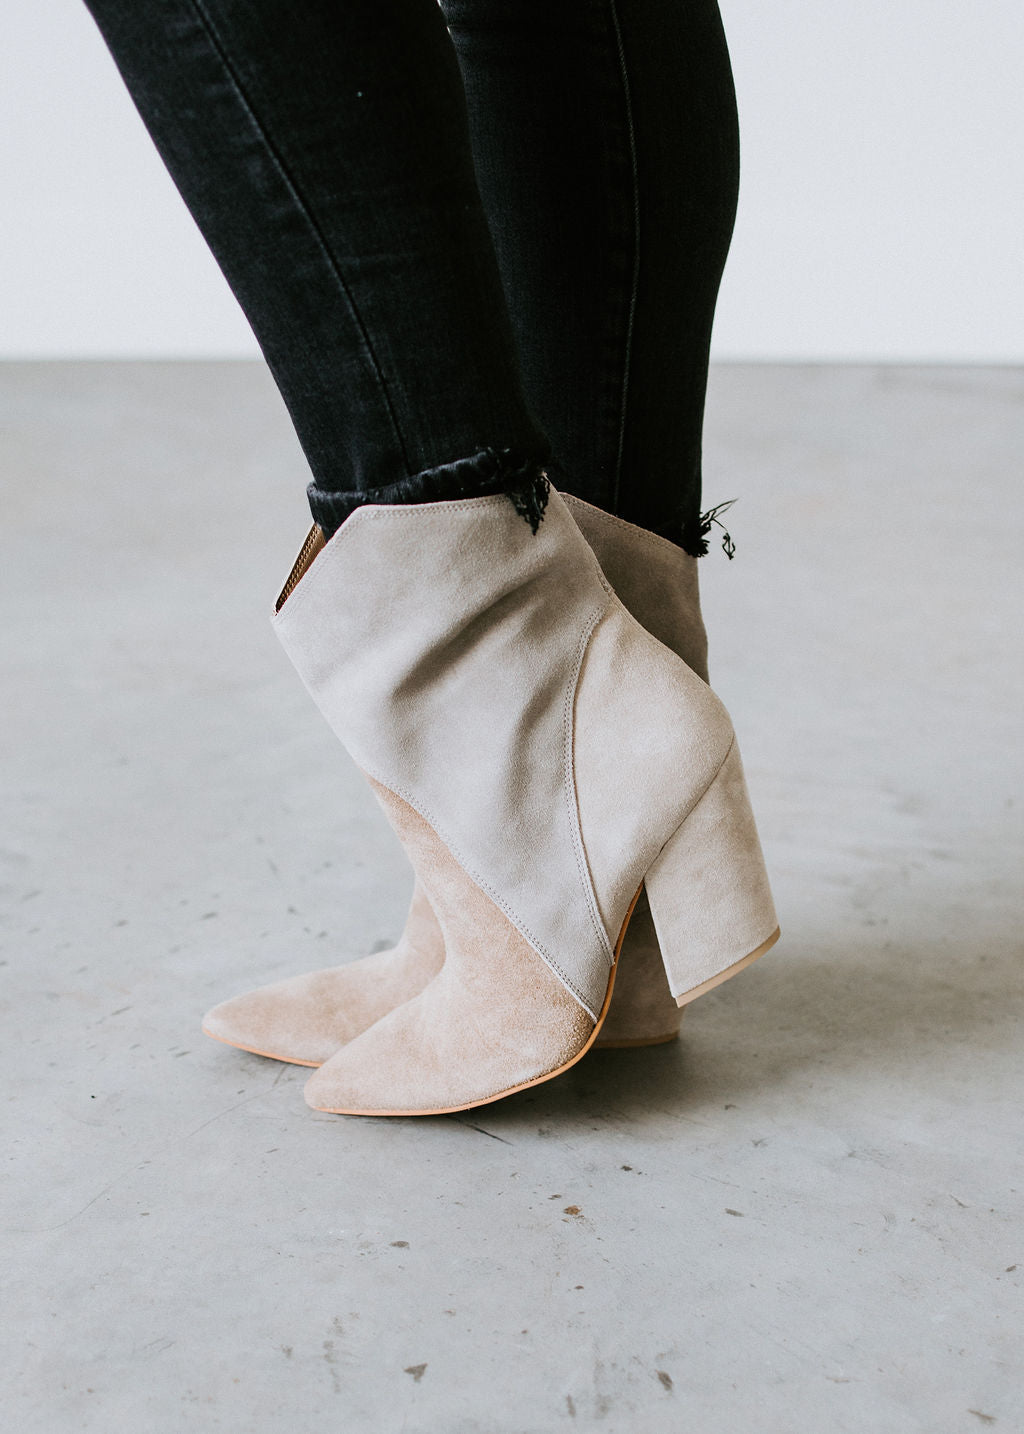 Dolce Vita Nestly Booties